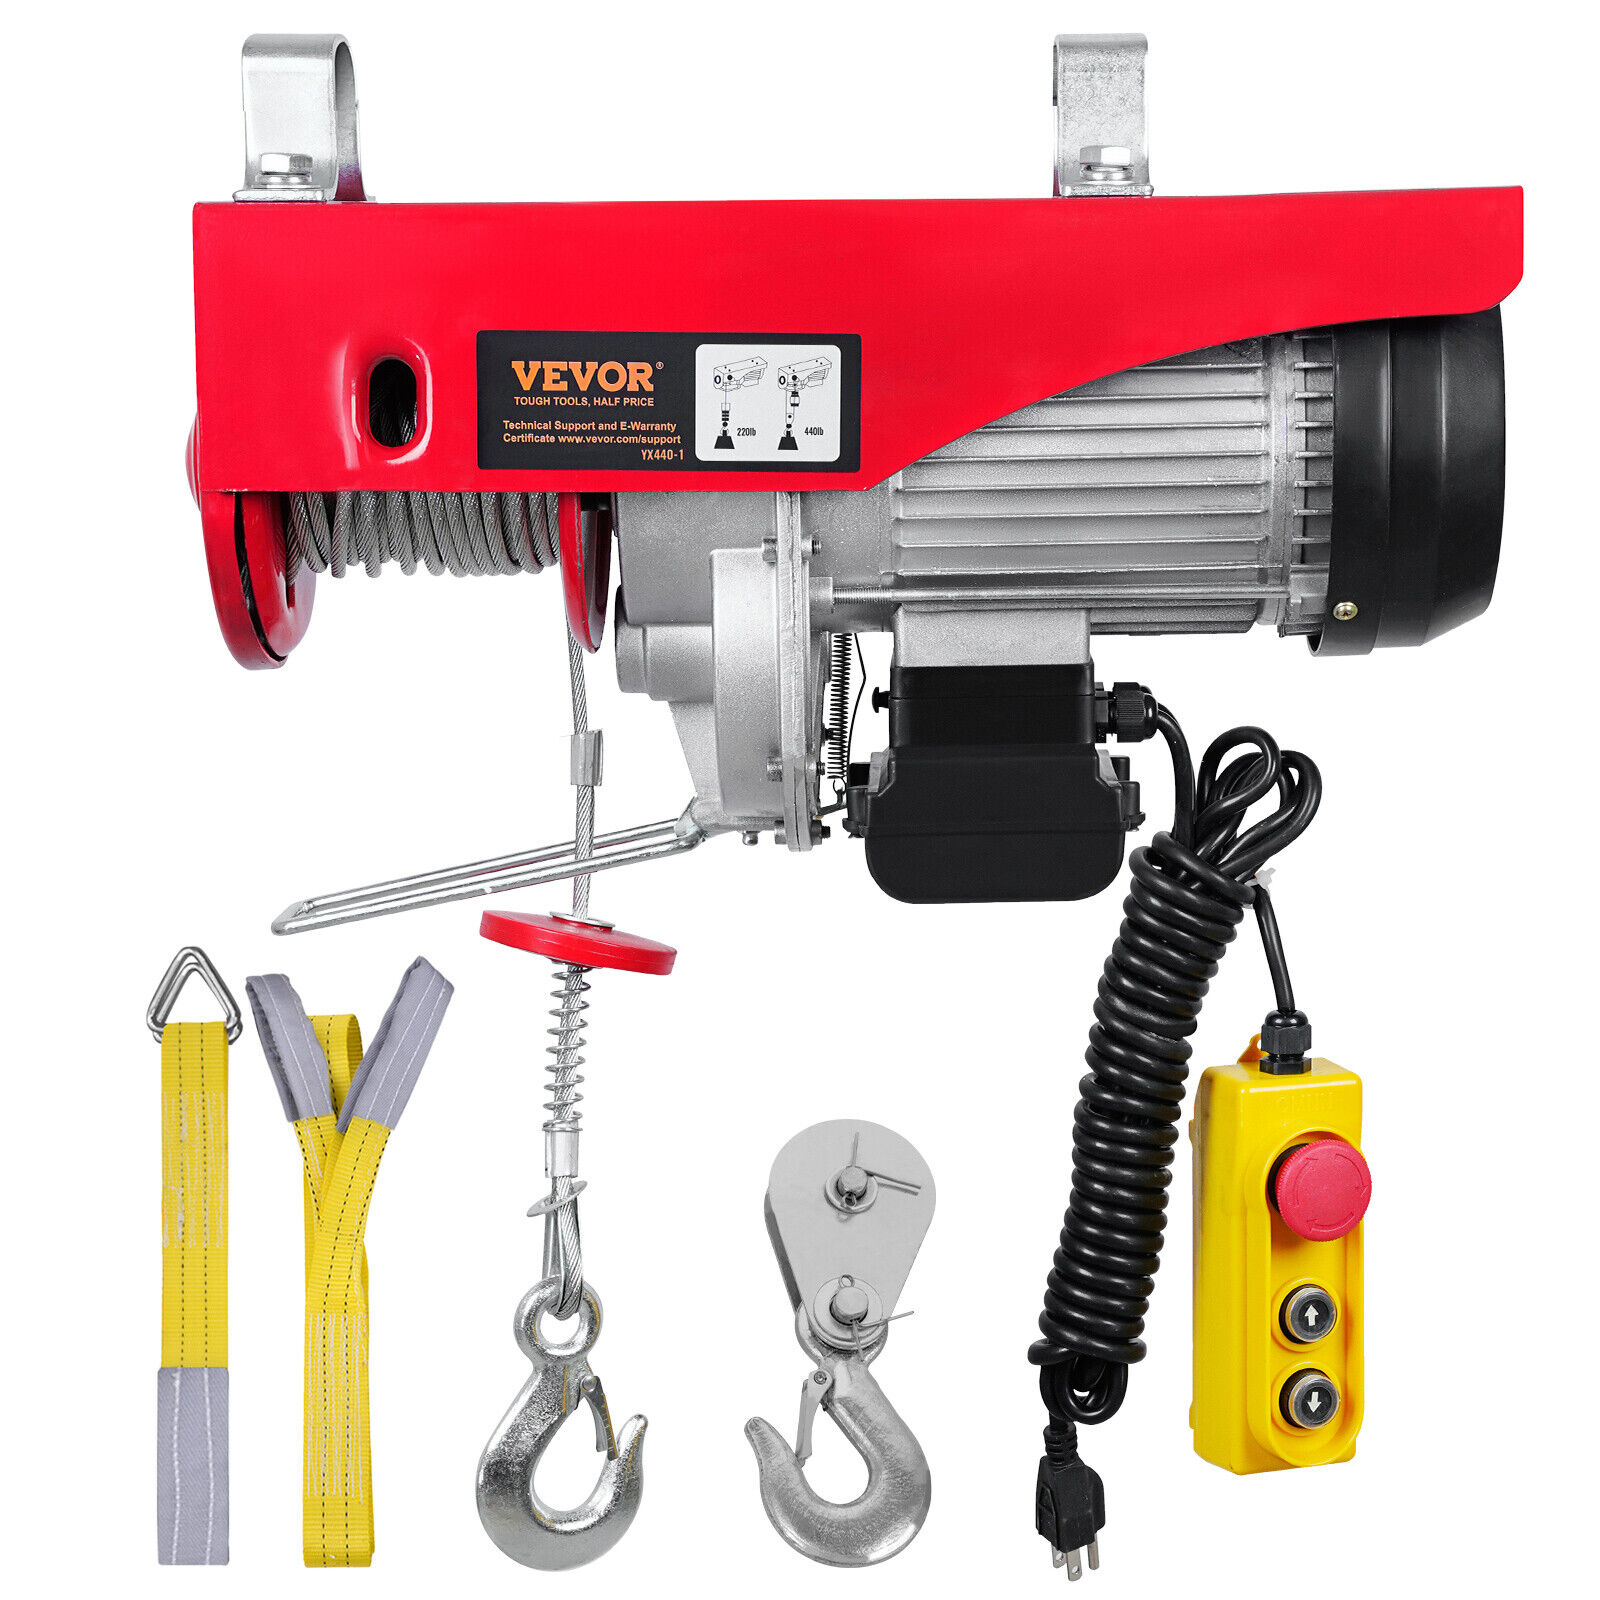 VEVOR Electric Hoist 440 lbs Crane Winch with 14FT Wired Remote Control 110V